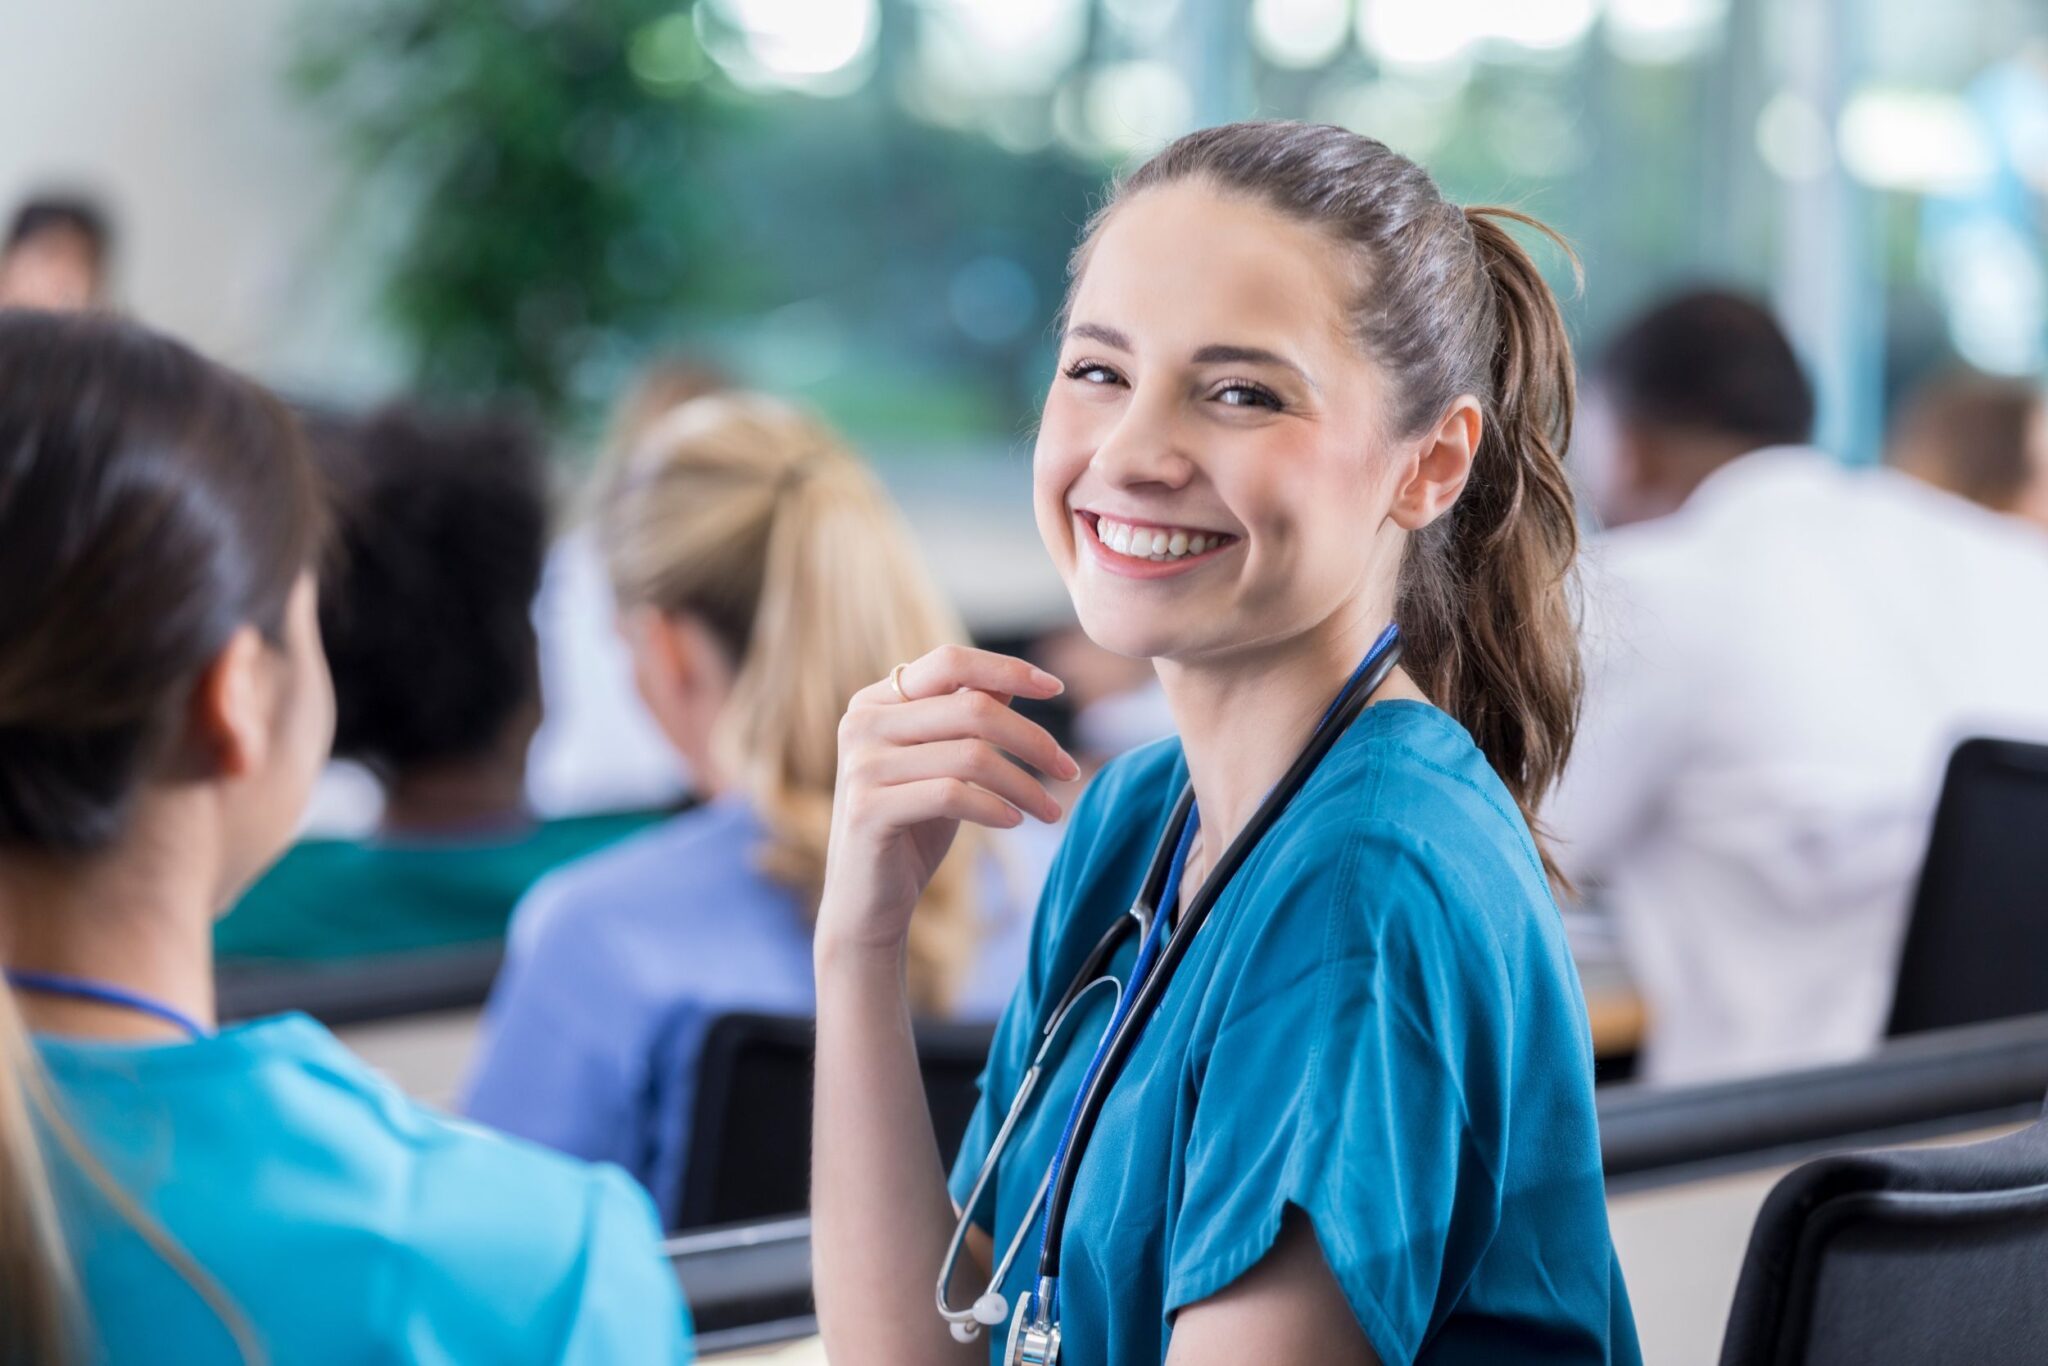 A young nurse smiling at the camera in a room full of nurses